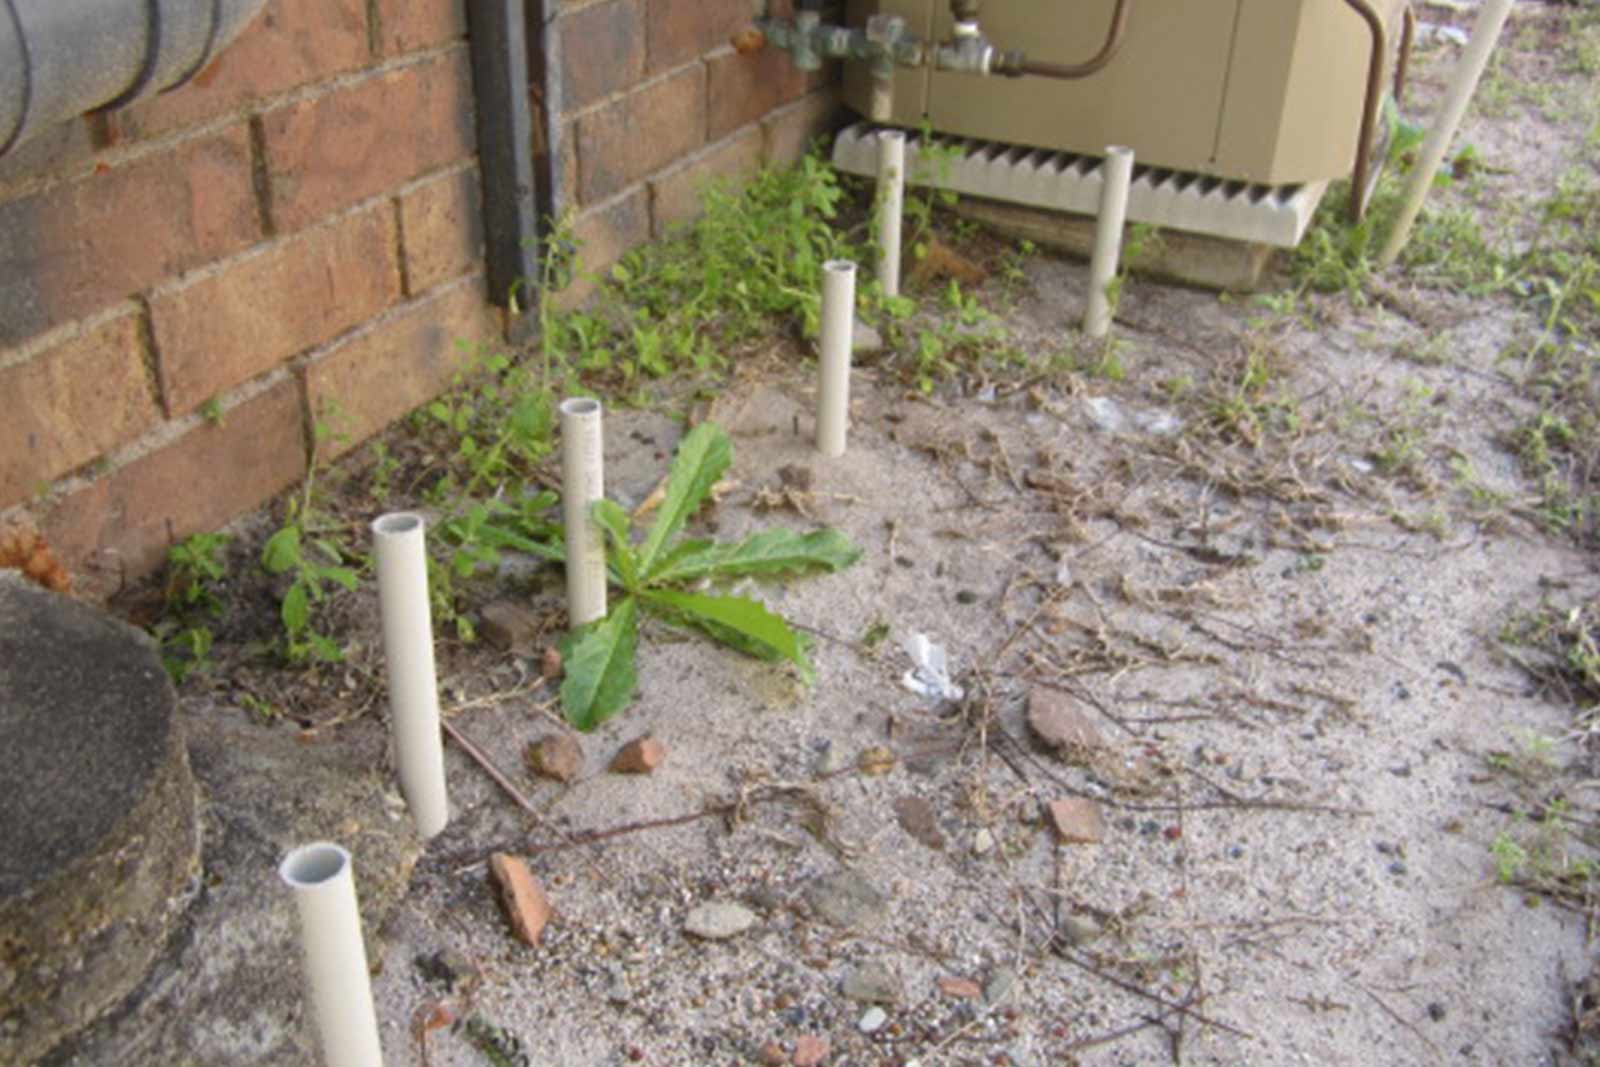 DIY termite treatment - how not to do it!